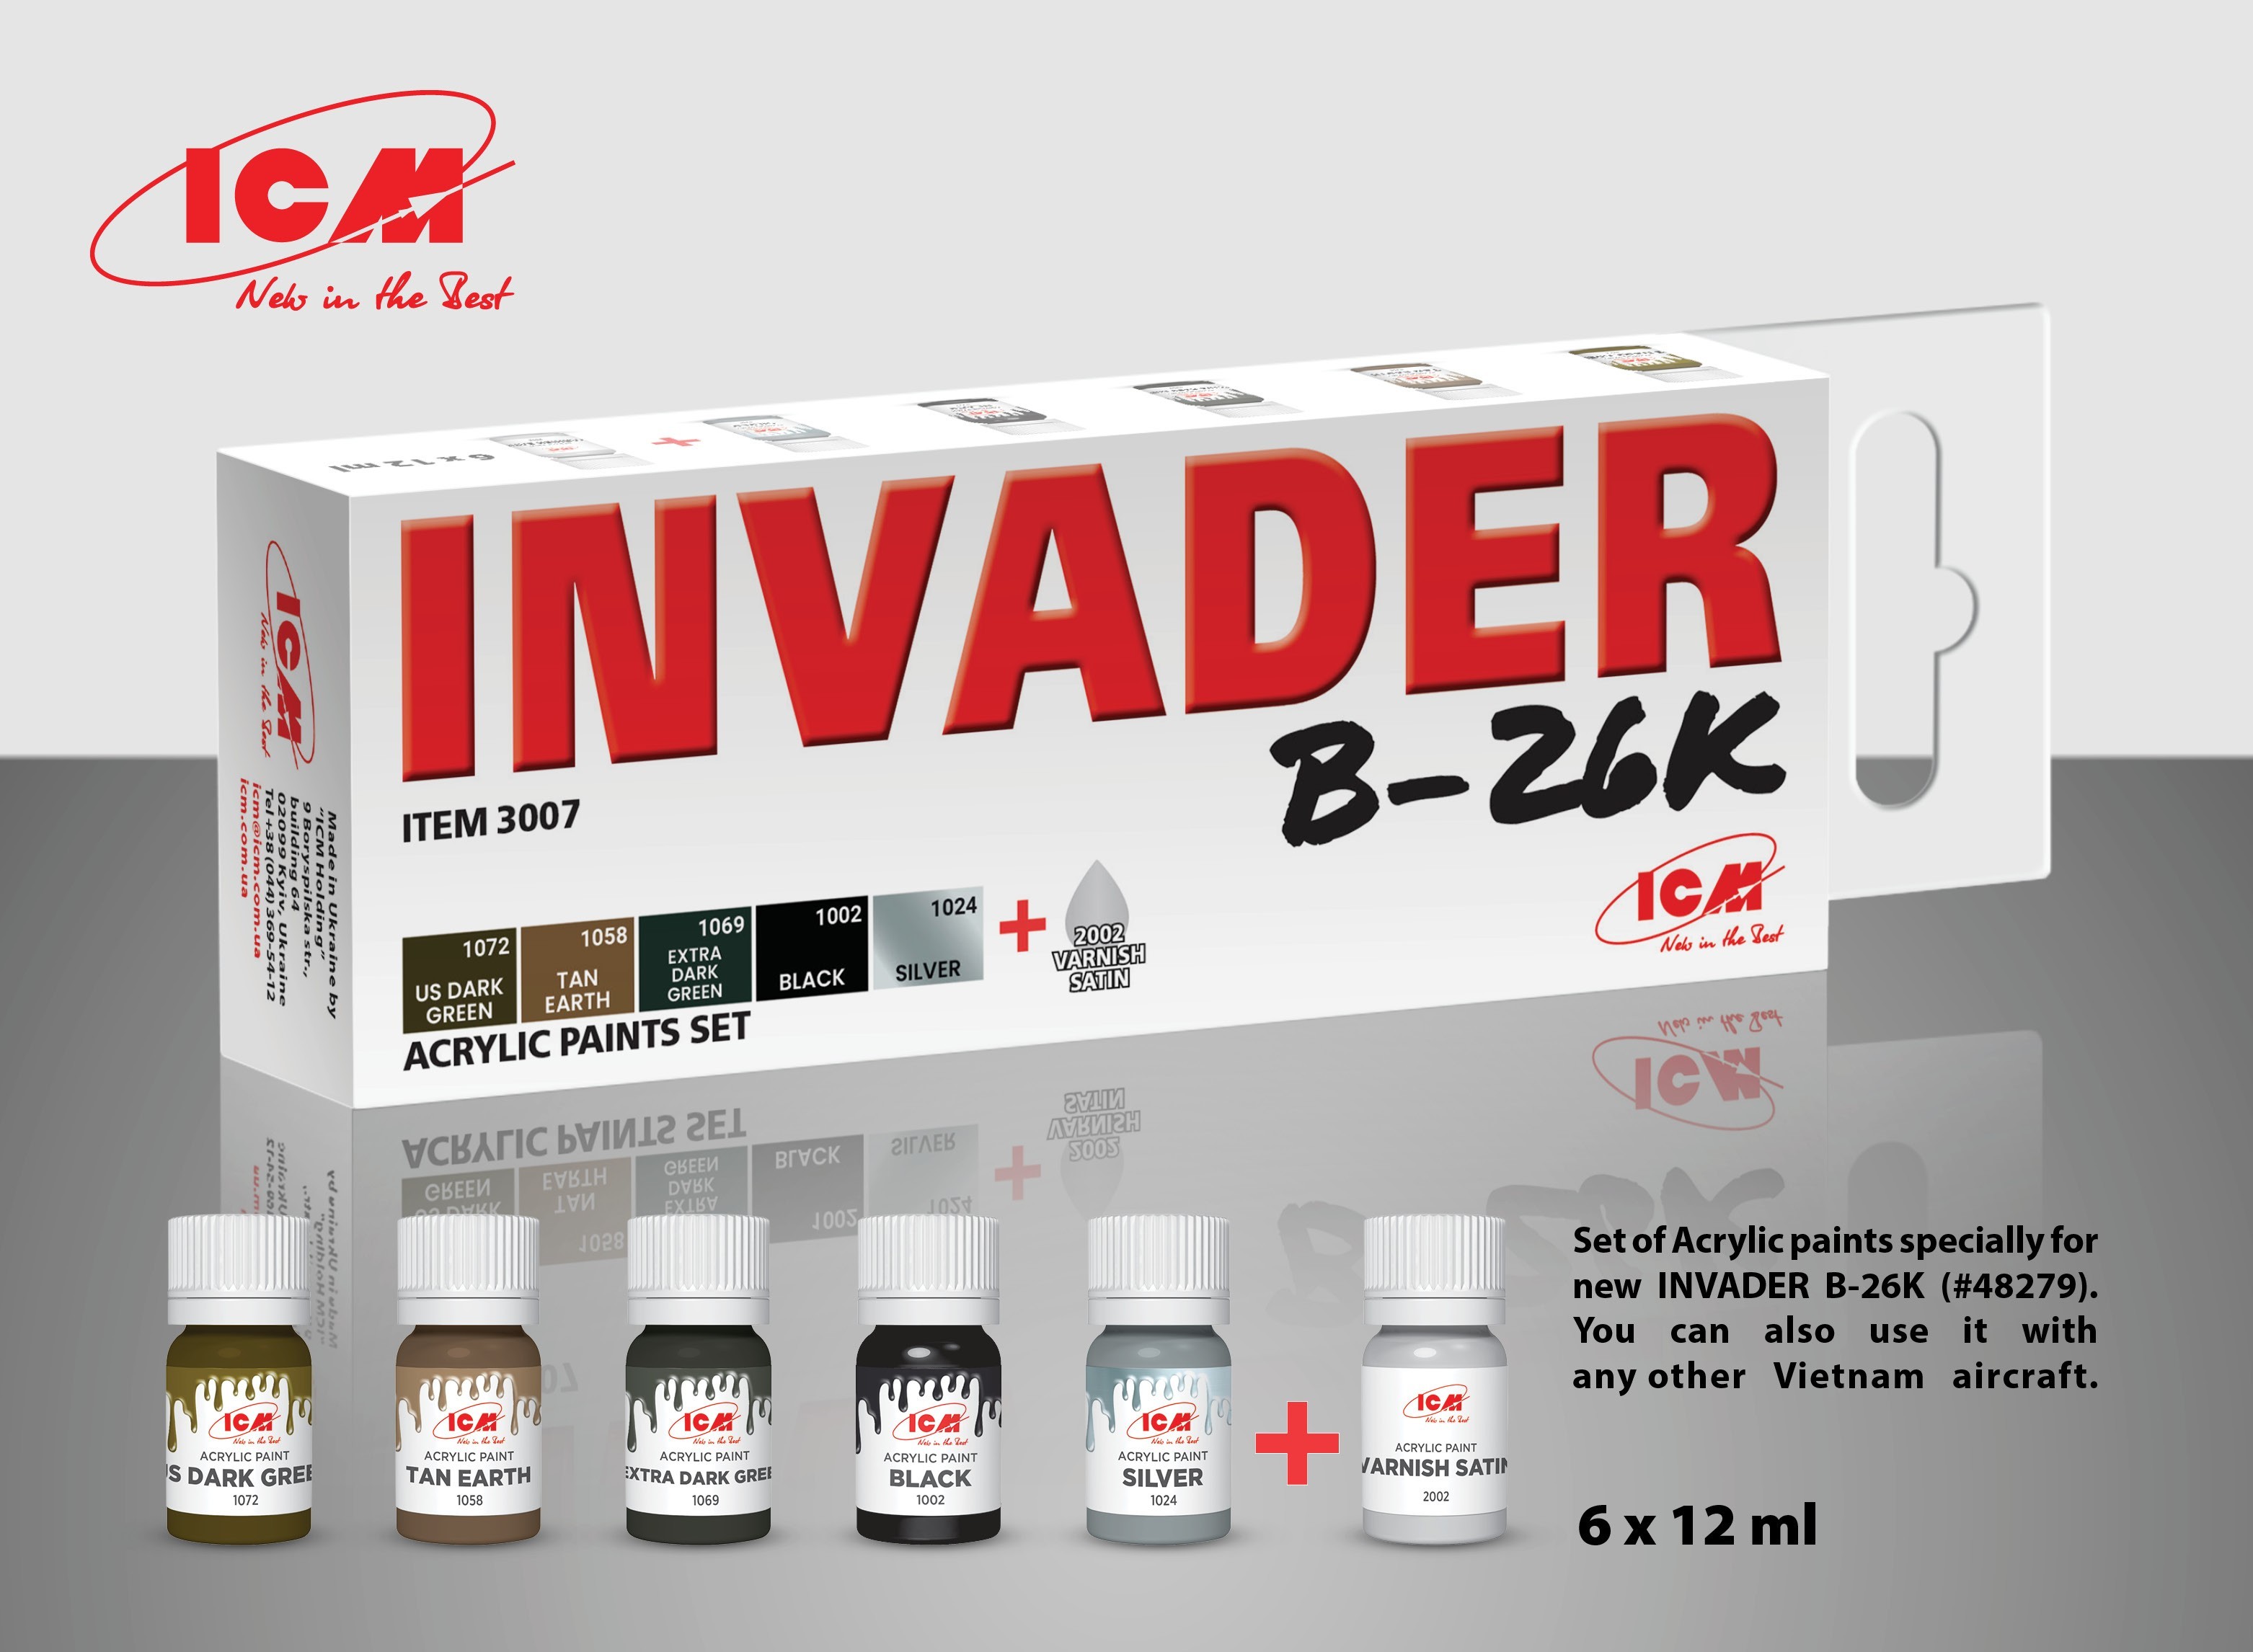 Acrylic paint set for INVADER B-26K (and other Vietnam aircraft)